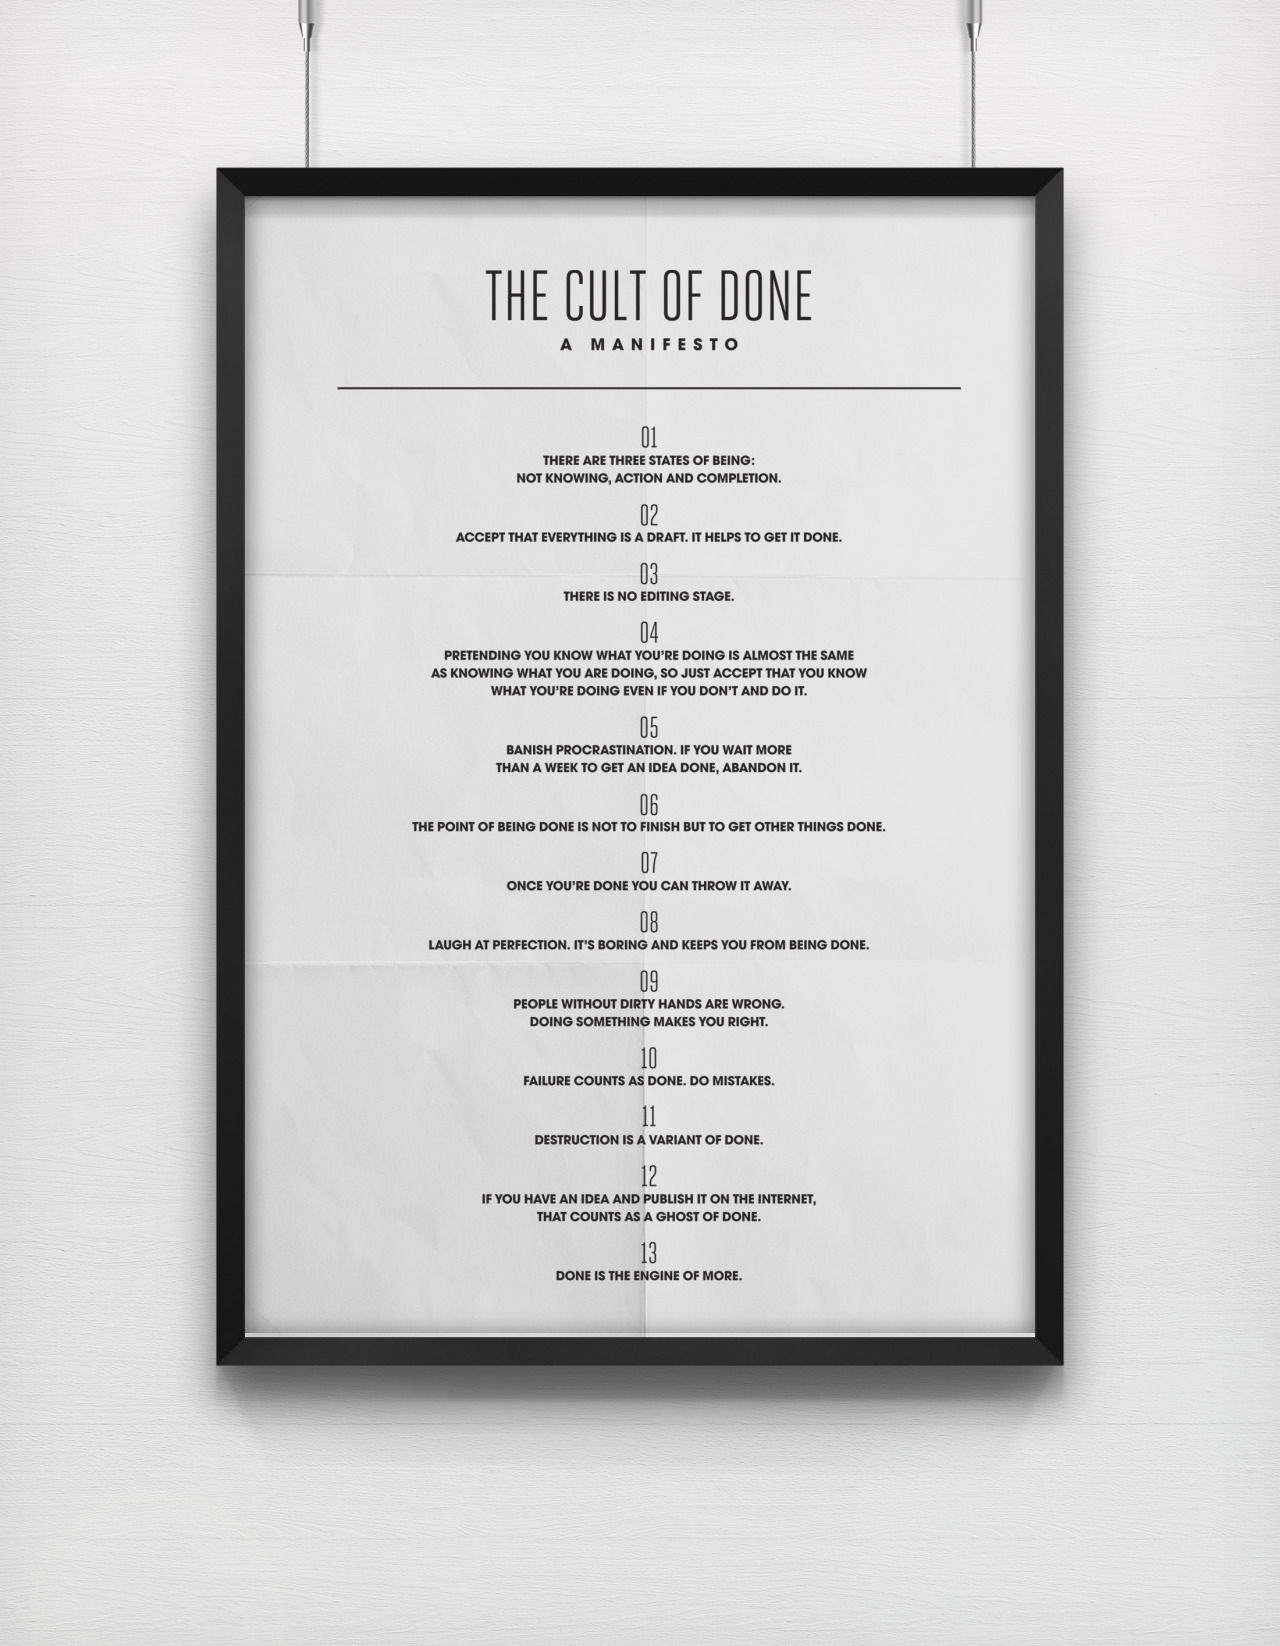 tumblr themes mobile Typography â€¢ of exercise. Manifesto. Cult Done Design Gap